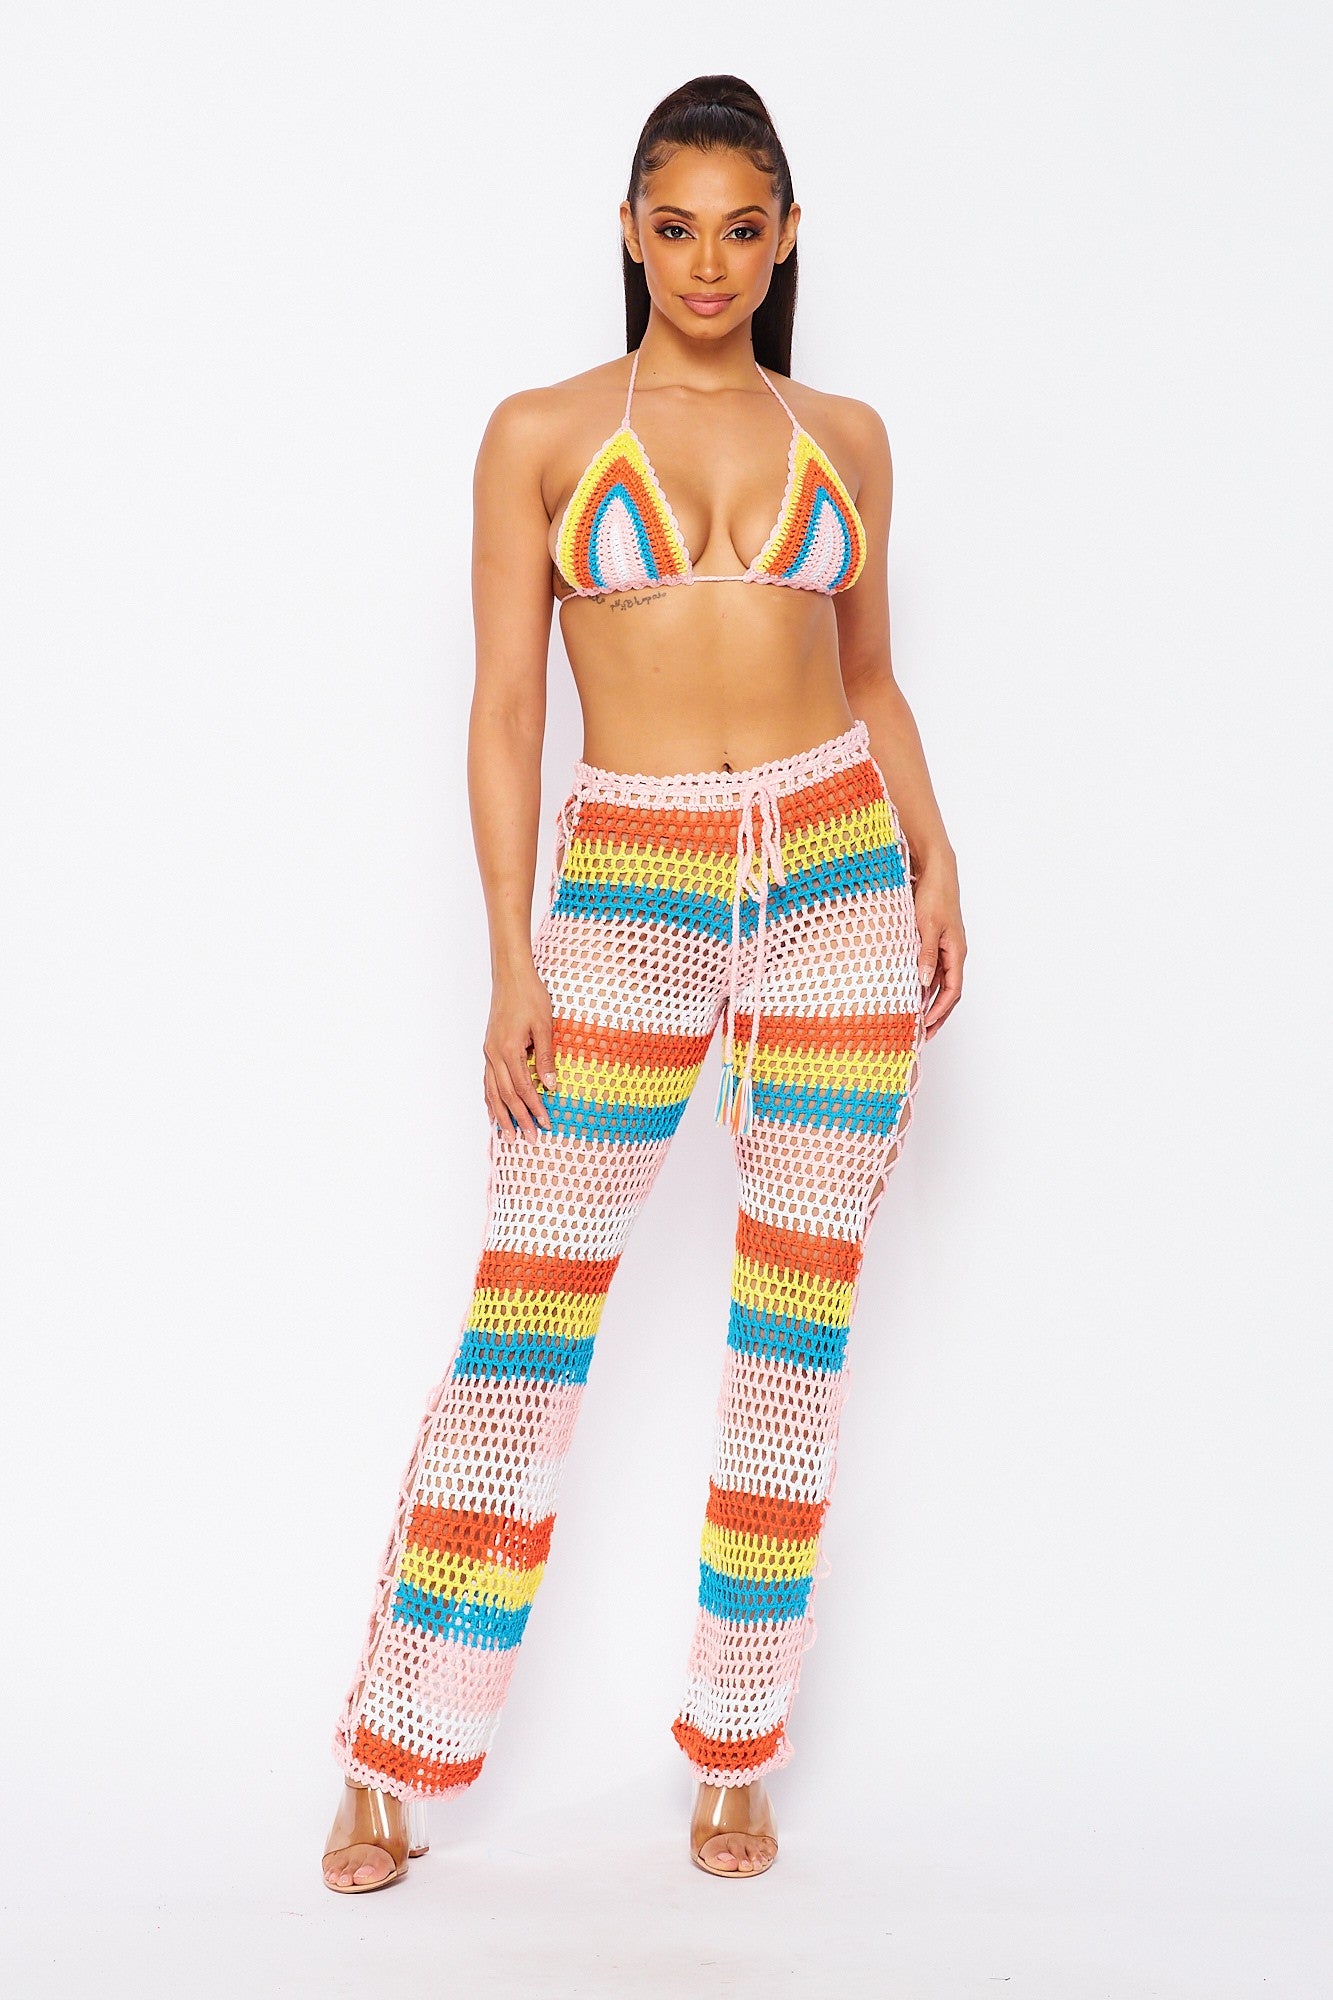 Let's Get Away Crochet Two Piece Cover Up Pant Set